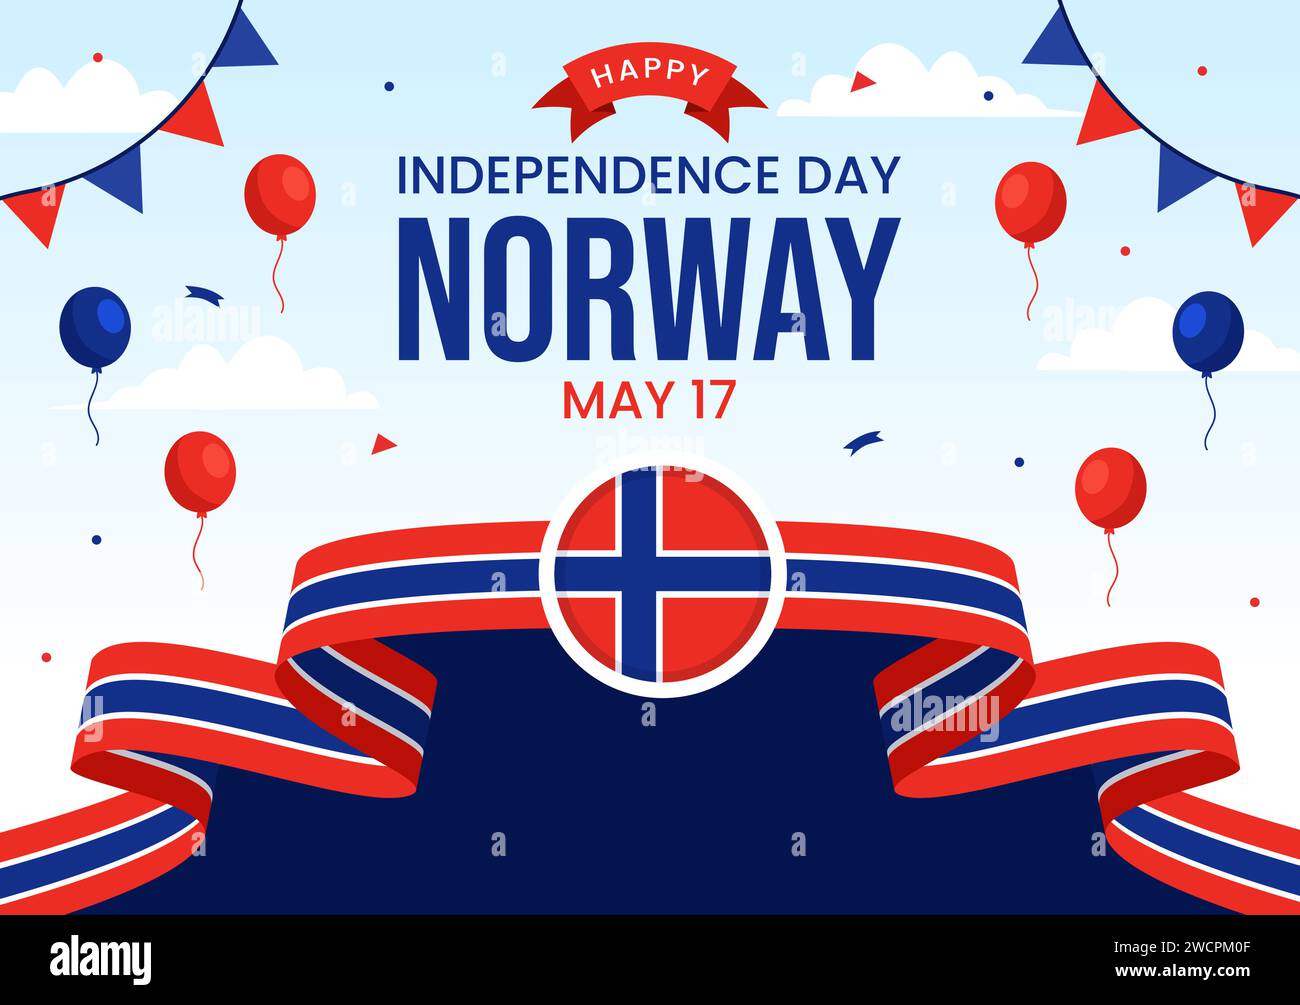 Norway Independence Day Vector Illustration on May 17 with Flag of Norwegian and Ribbon in National Holiday Celebration Flat Cartoon Background Stock Vector